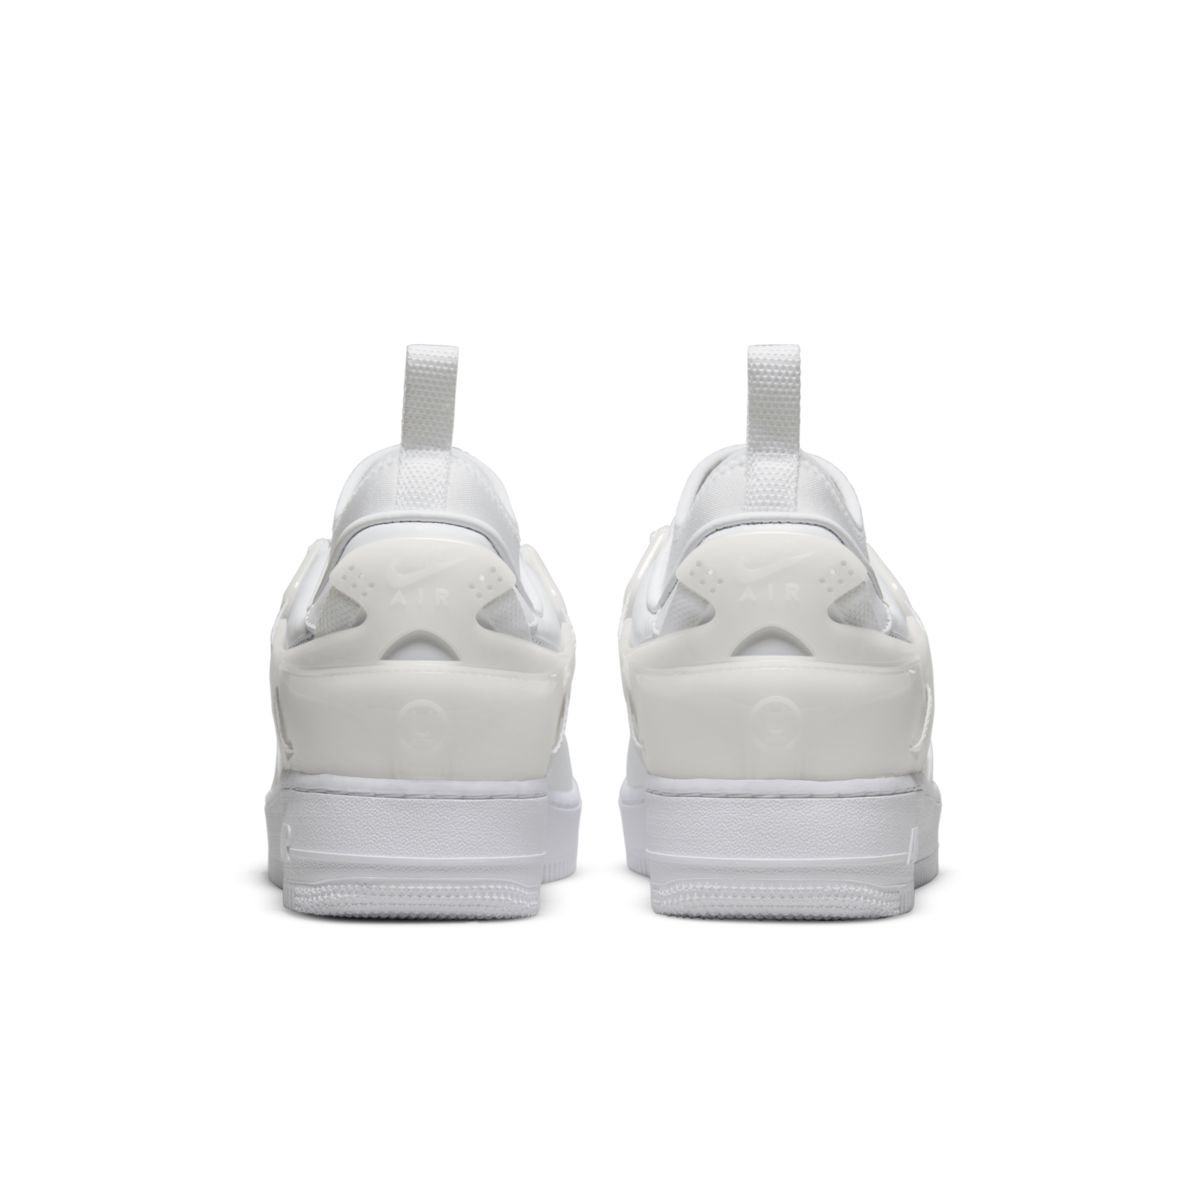 Undercover x Nike Air Force 1 Low White DQ7558-101 6